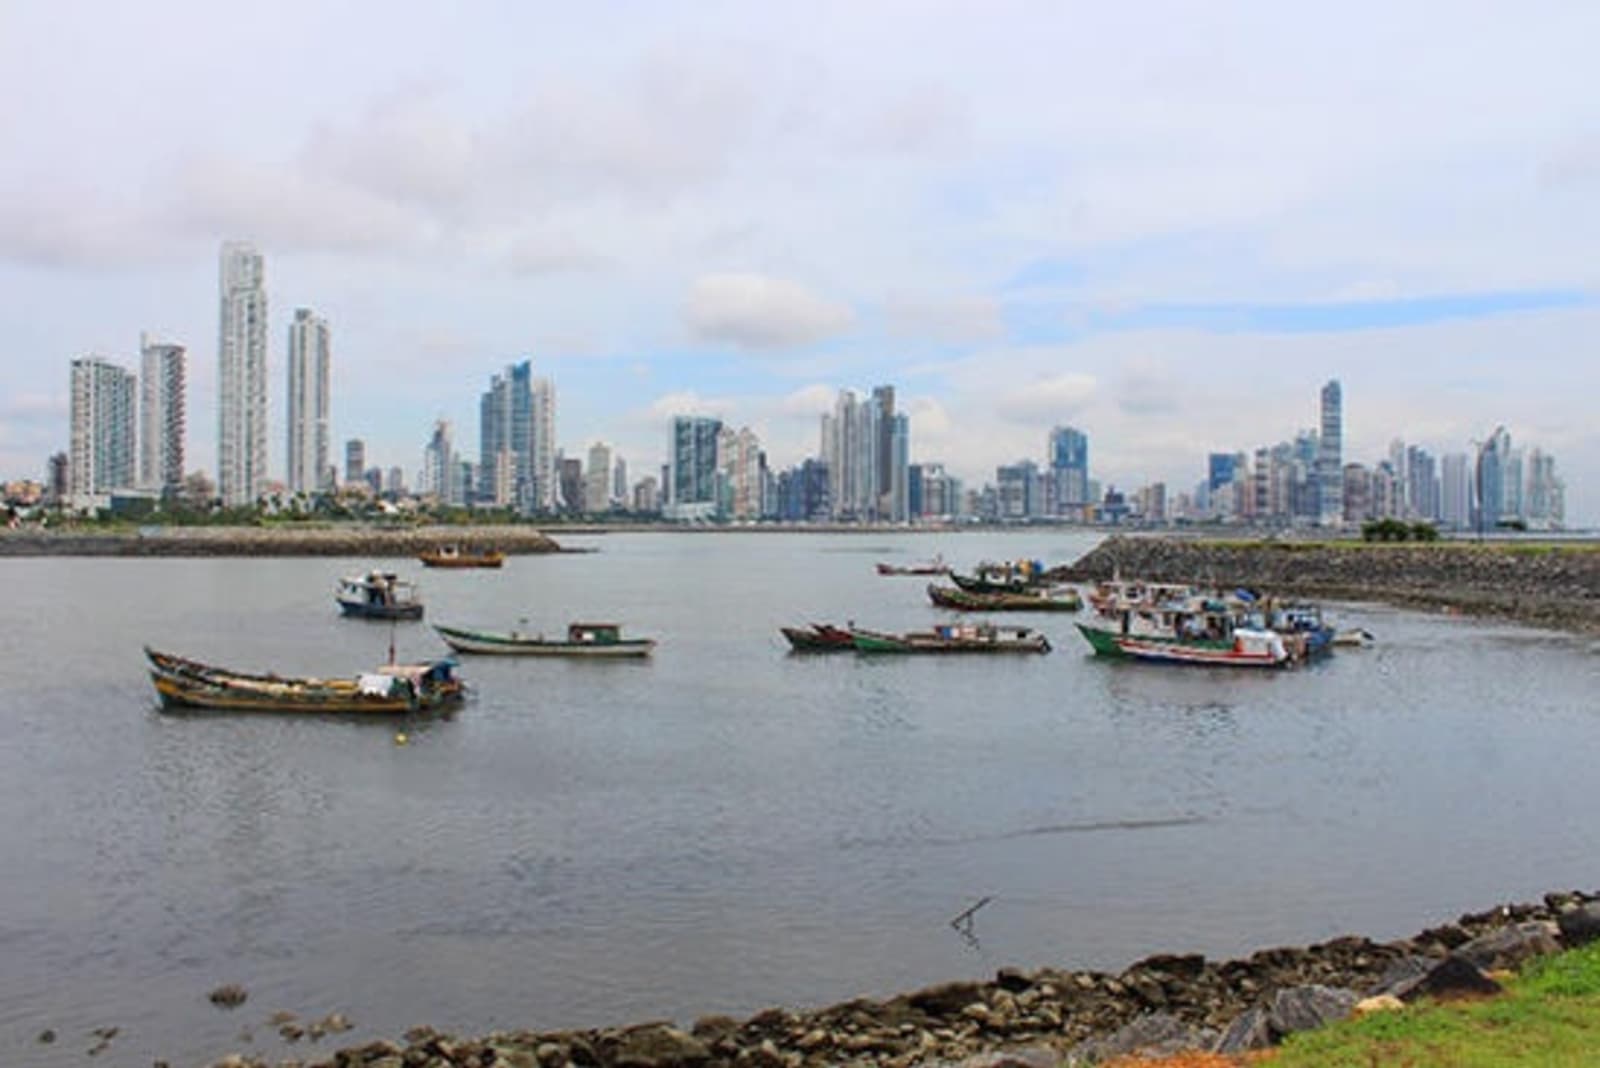 Boats on the water in Panama City.